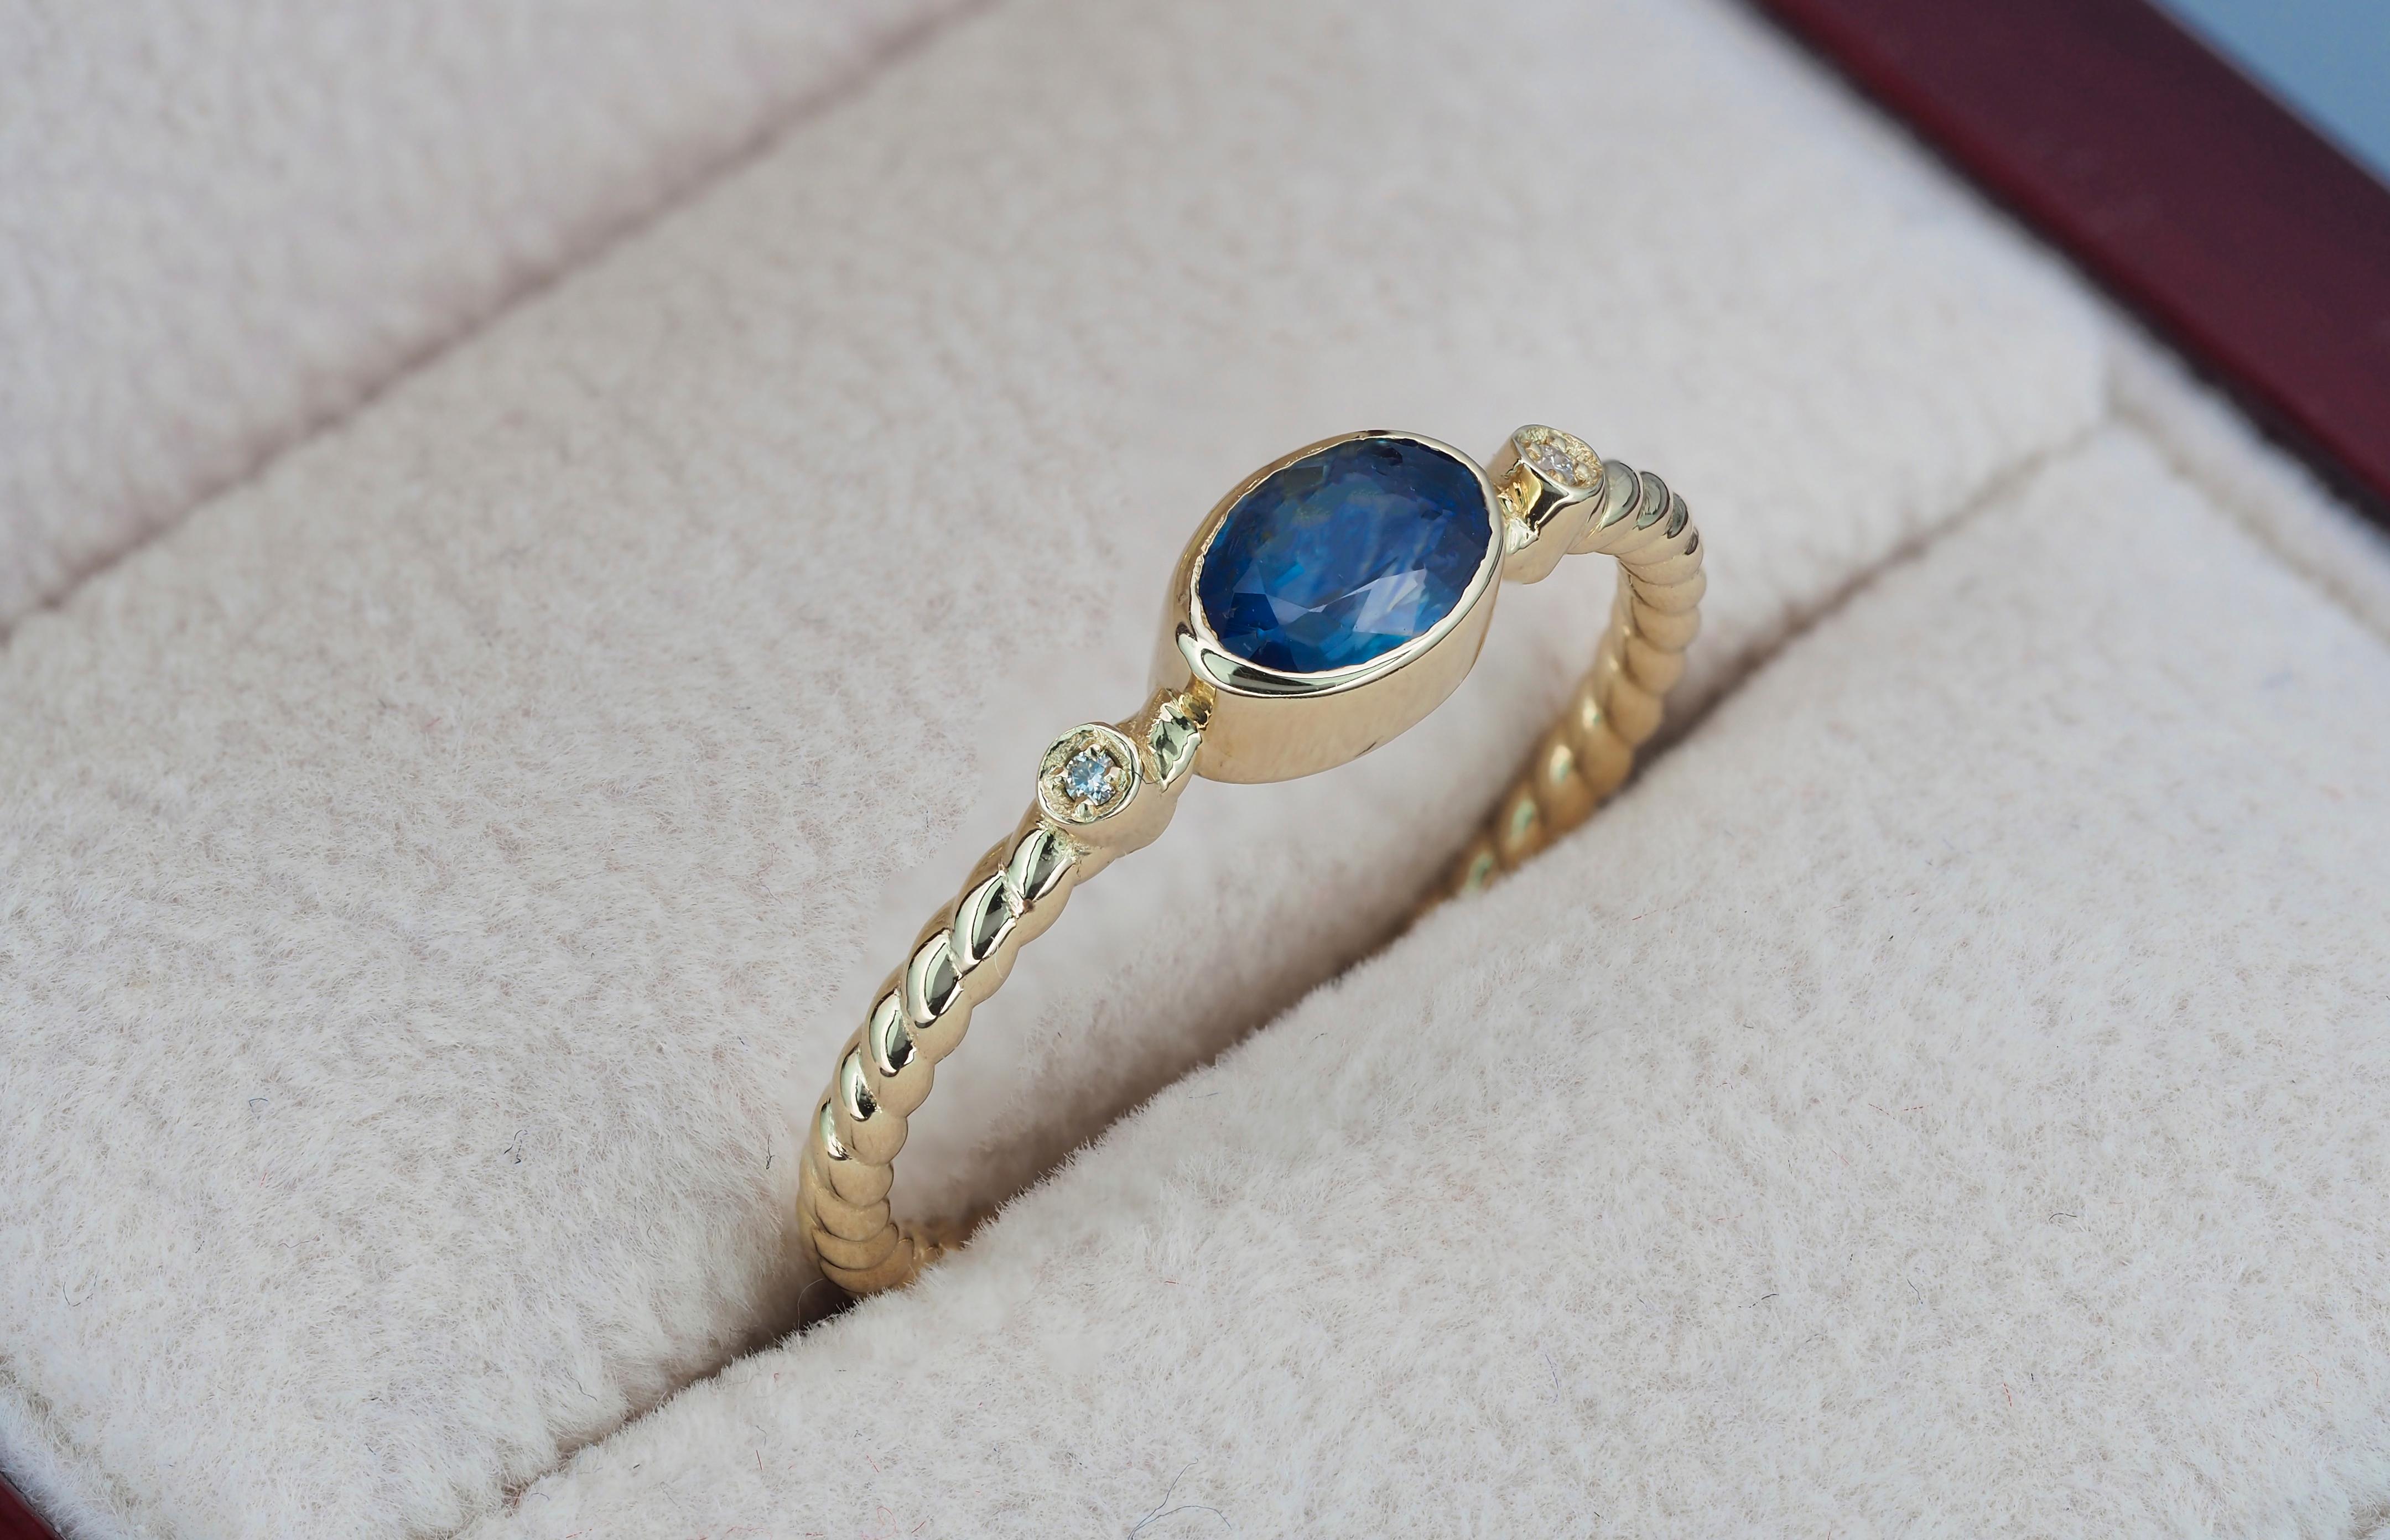 For Sale:  Blue sapphire ring in 14k gold.  5